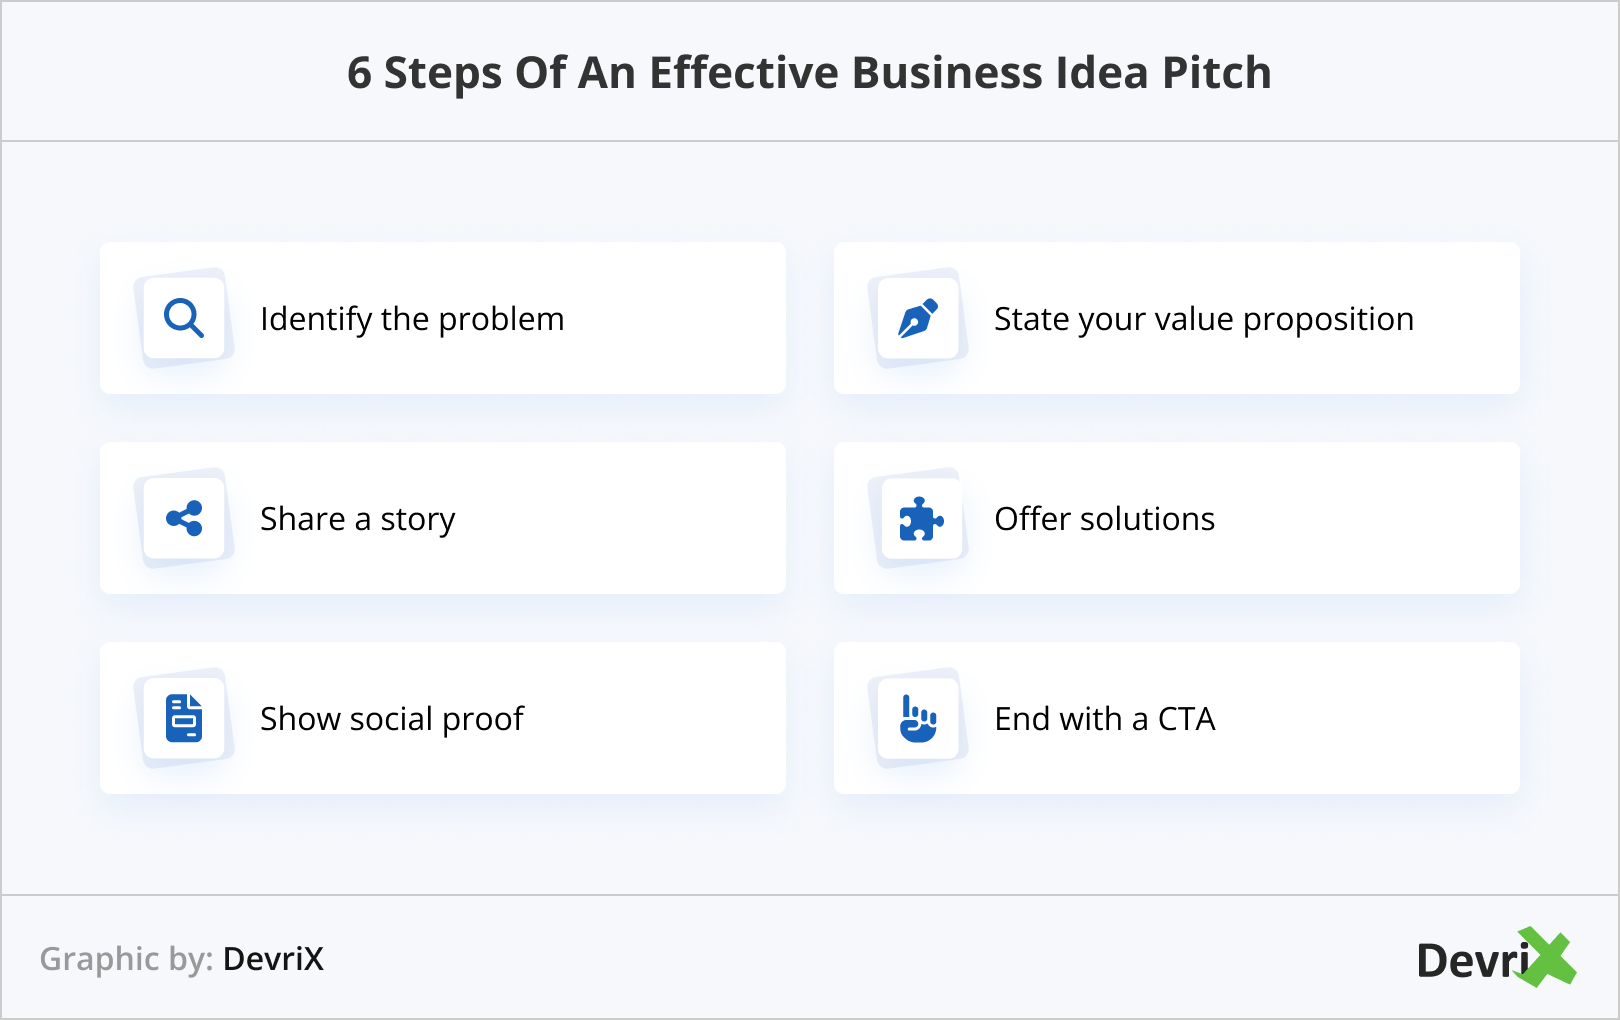 6 Steps Of An Effective Business Idea Pitch